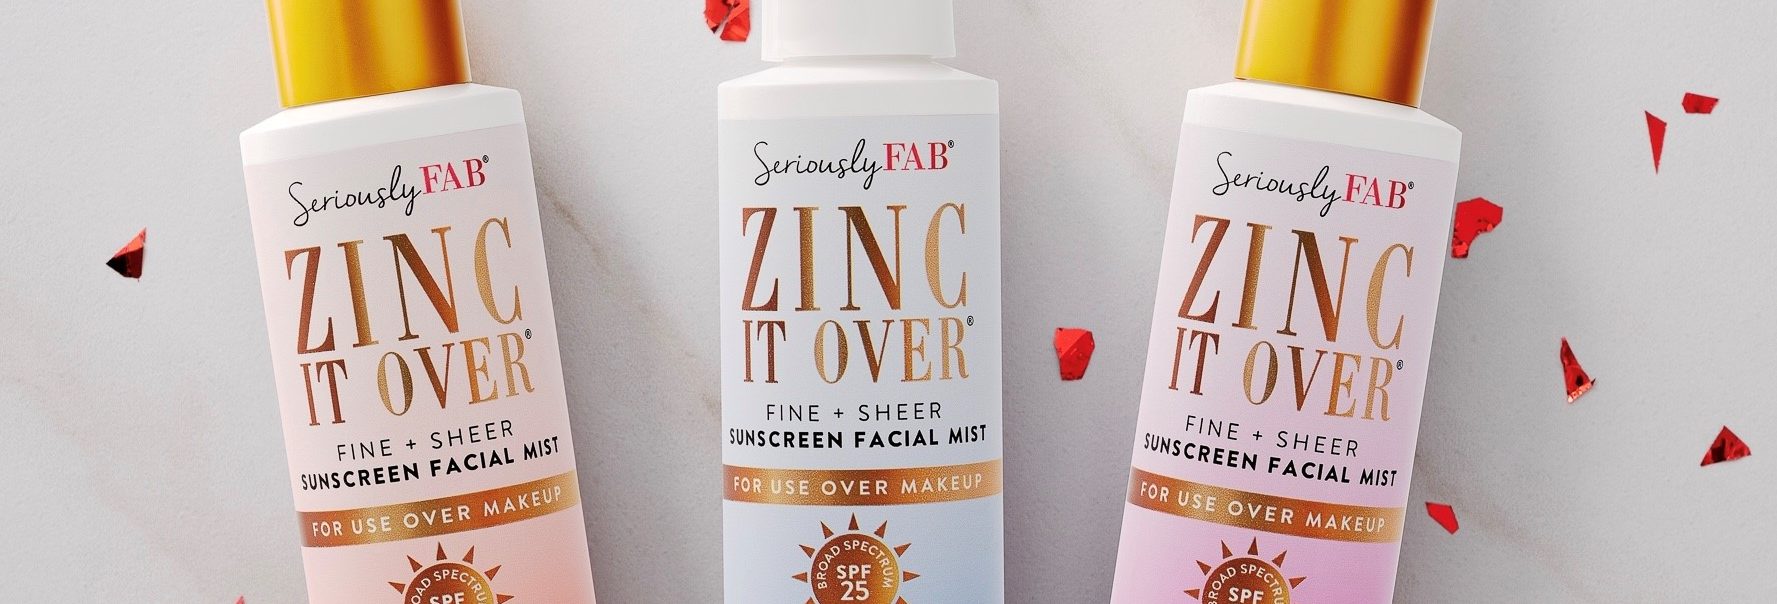 Is Seriously FAB cruelty free?